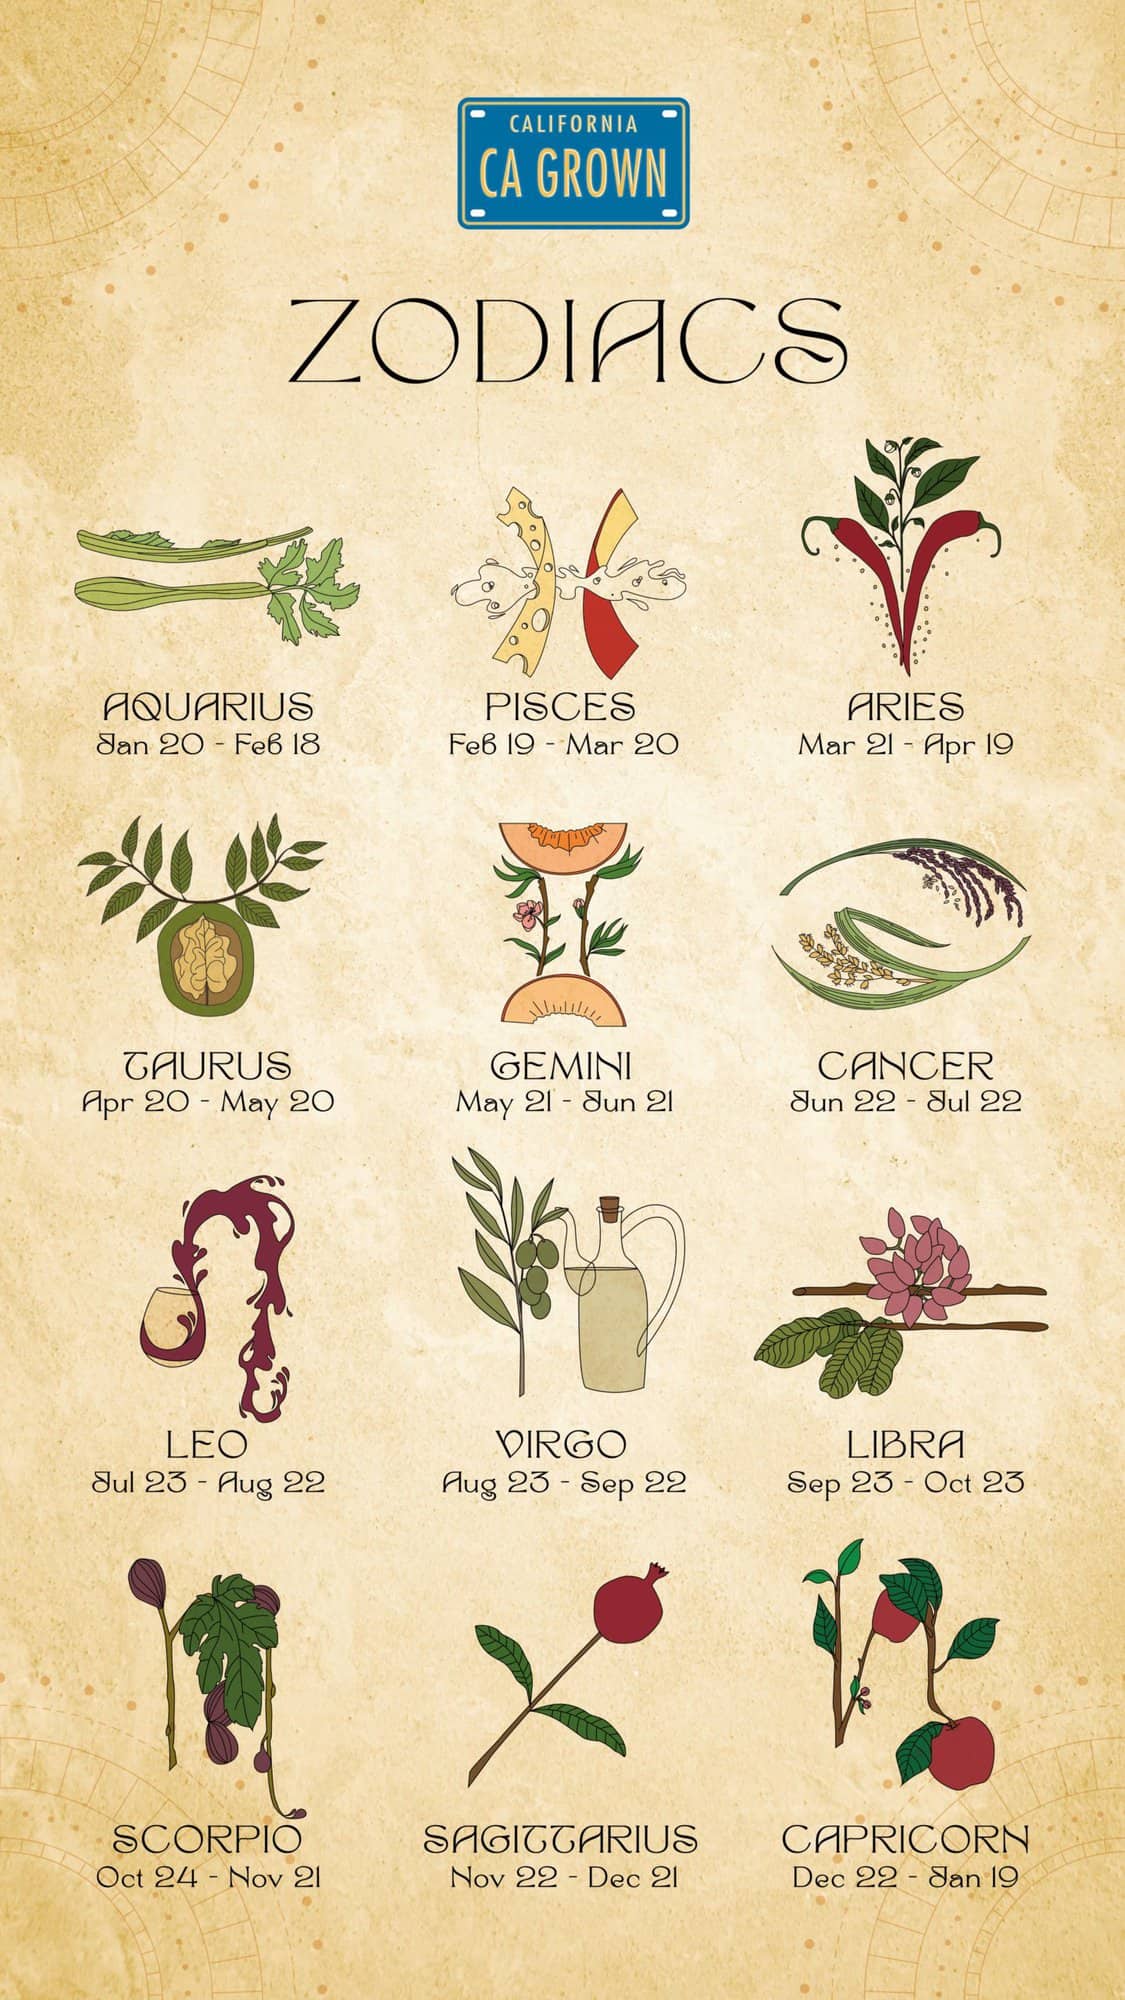 What CA GROWN Commodity Matches Your Zodiac Sign?